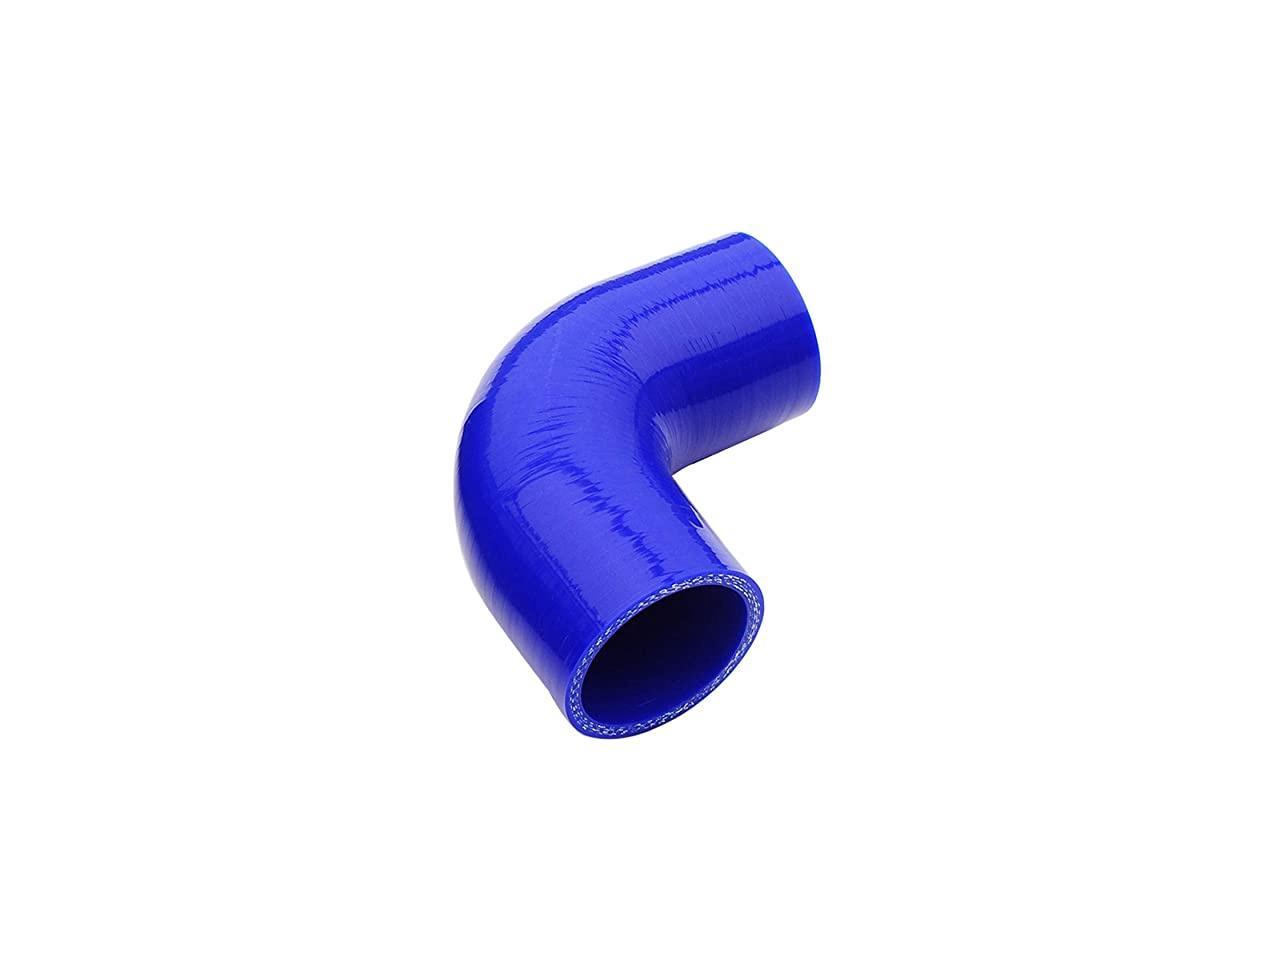 Leg Length 3.5 90 Degree Elbow Coupler ID 2 80 PSI Maximum Pressure No Logo 3-Ply Reinforced 90mm Wall Thickness 0.18 4.5mm Black Universal Automotive Pure Silicone Hose 51mm 